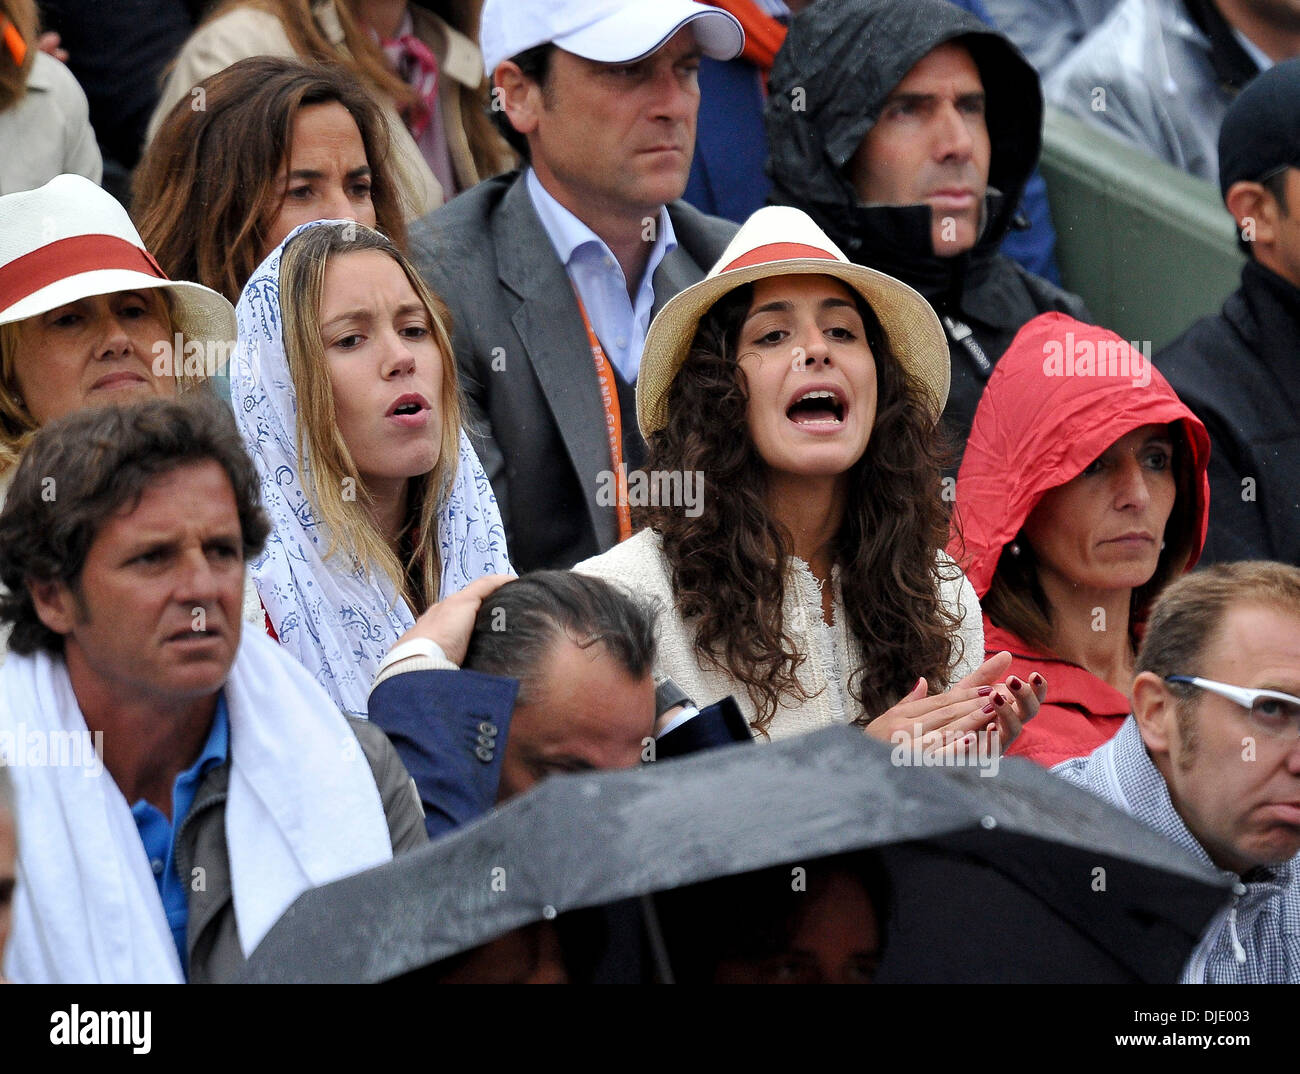 Maria Francisca Perello Aka Xisca The Girlfriend Of Rafael Nadal Celebrities Attending The Mens 2012 French Open Final At Roland Garros Paris France 10 06 12 Stock Photo Alamy